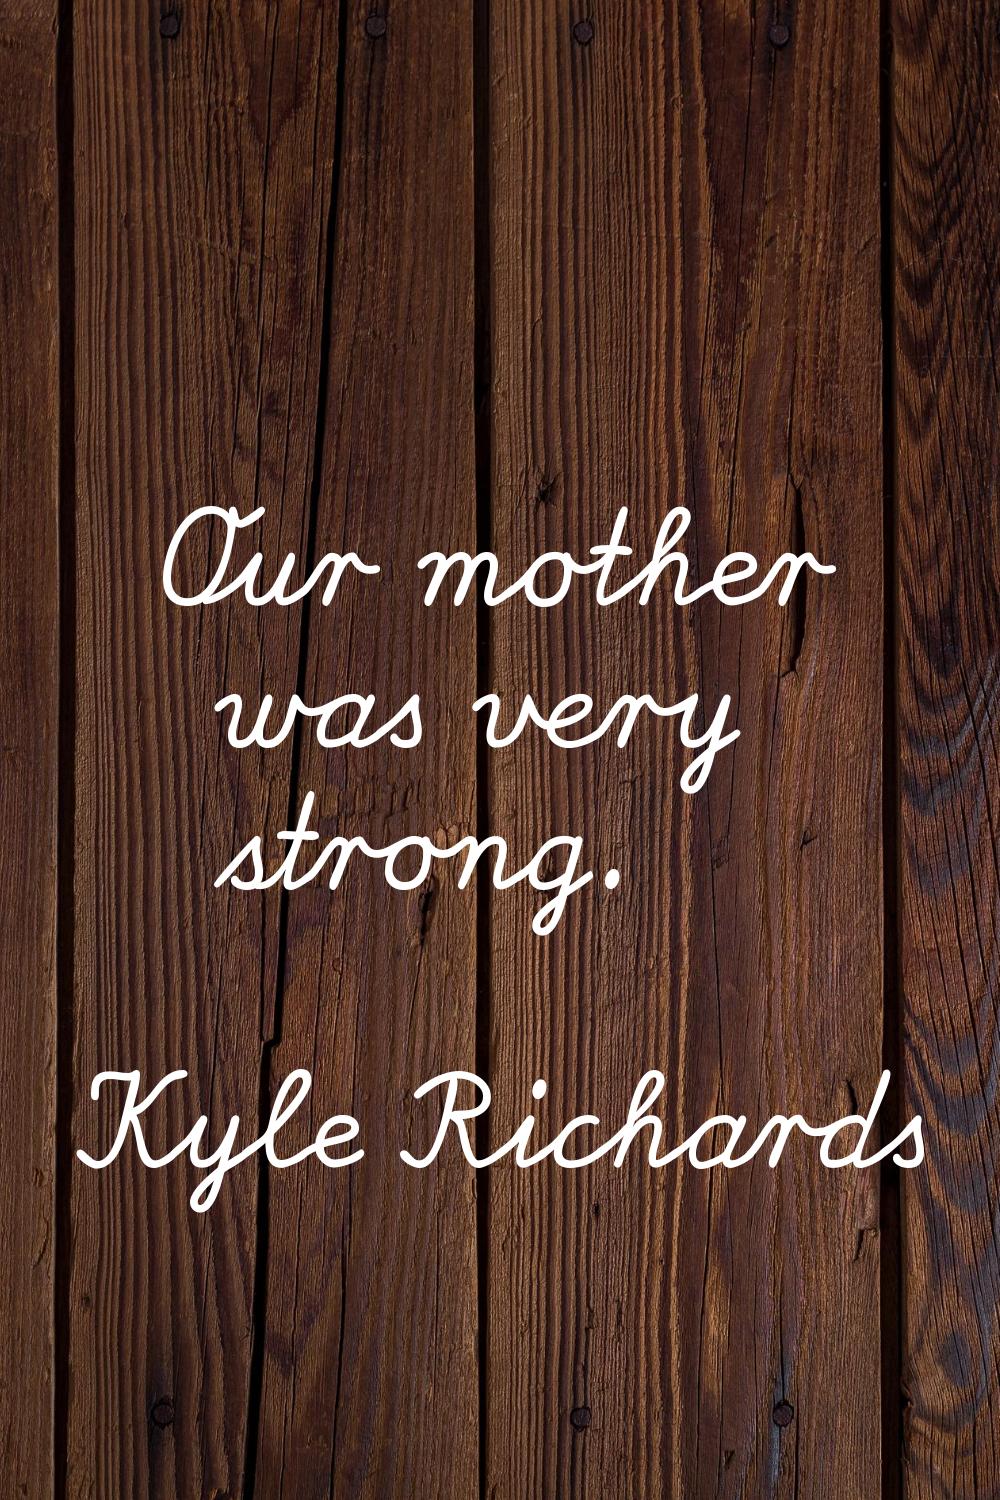 Our mother was very strong.